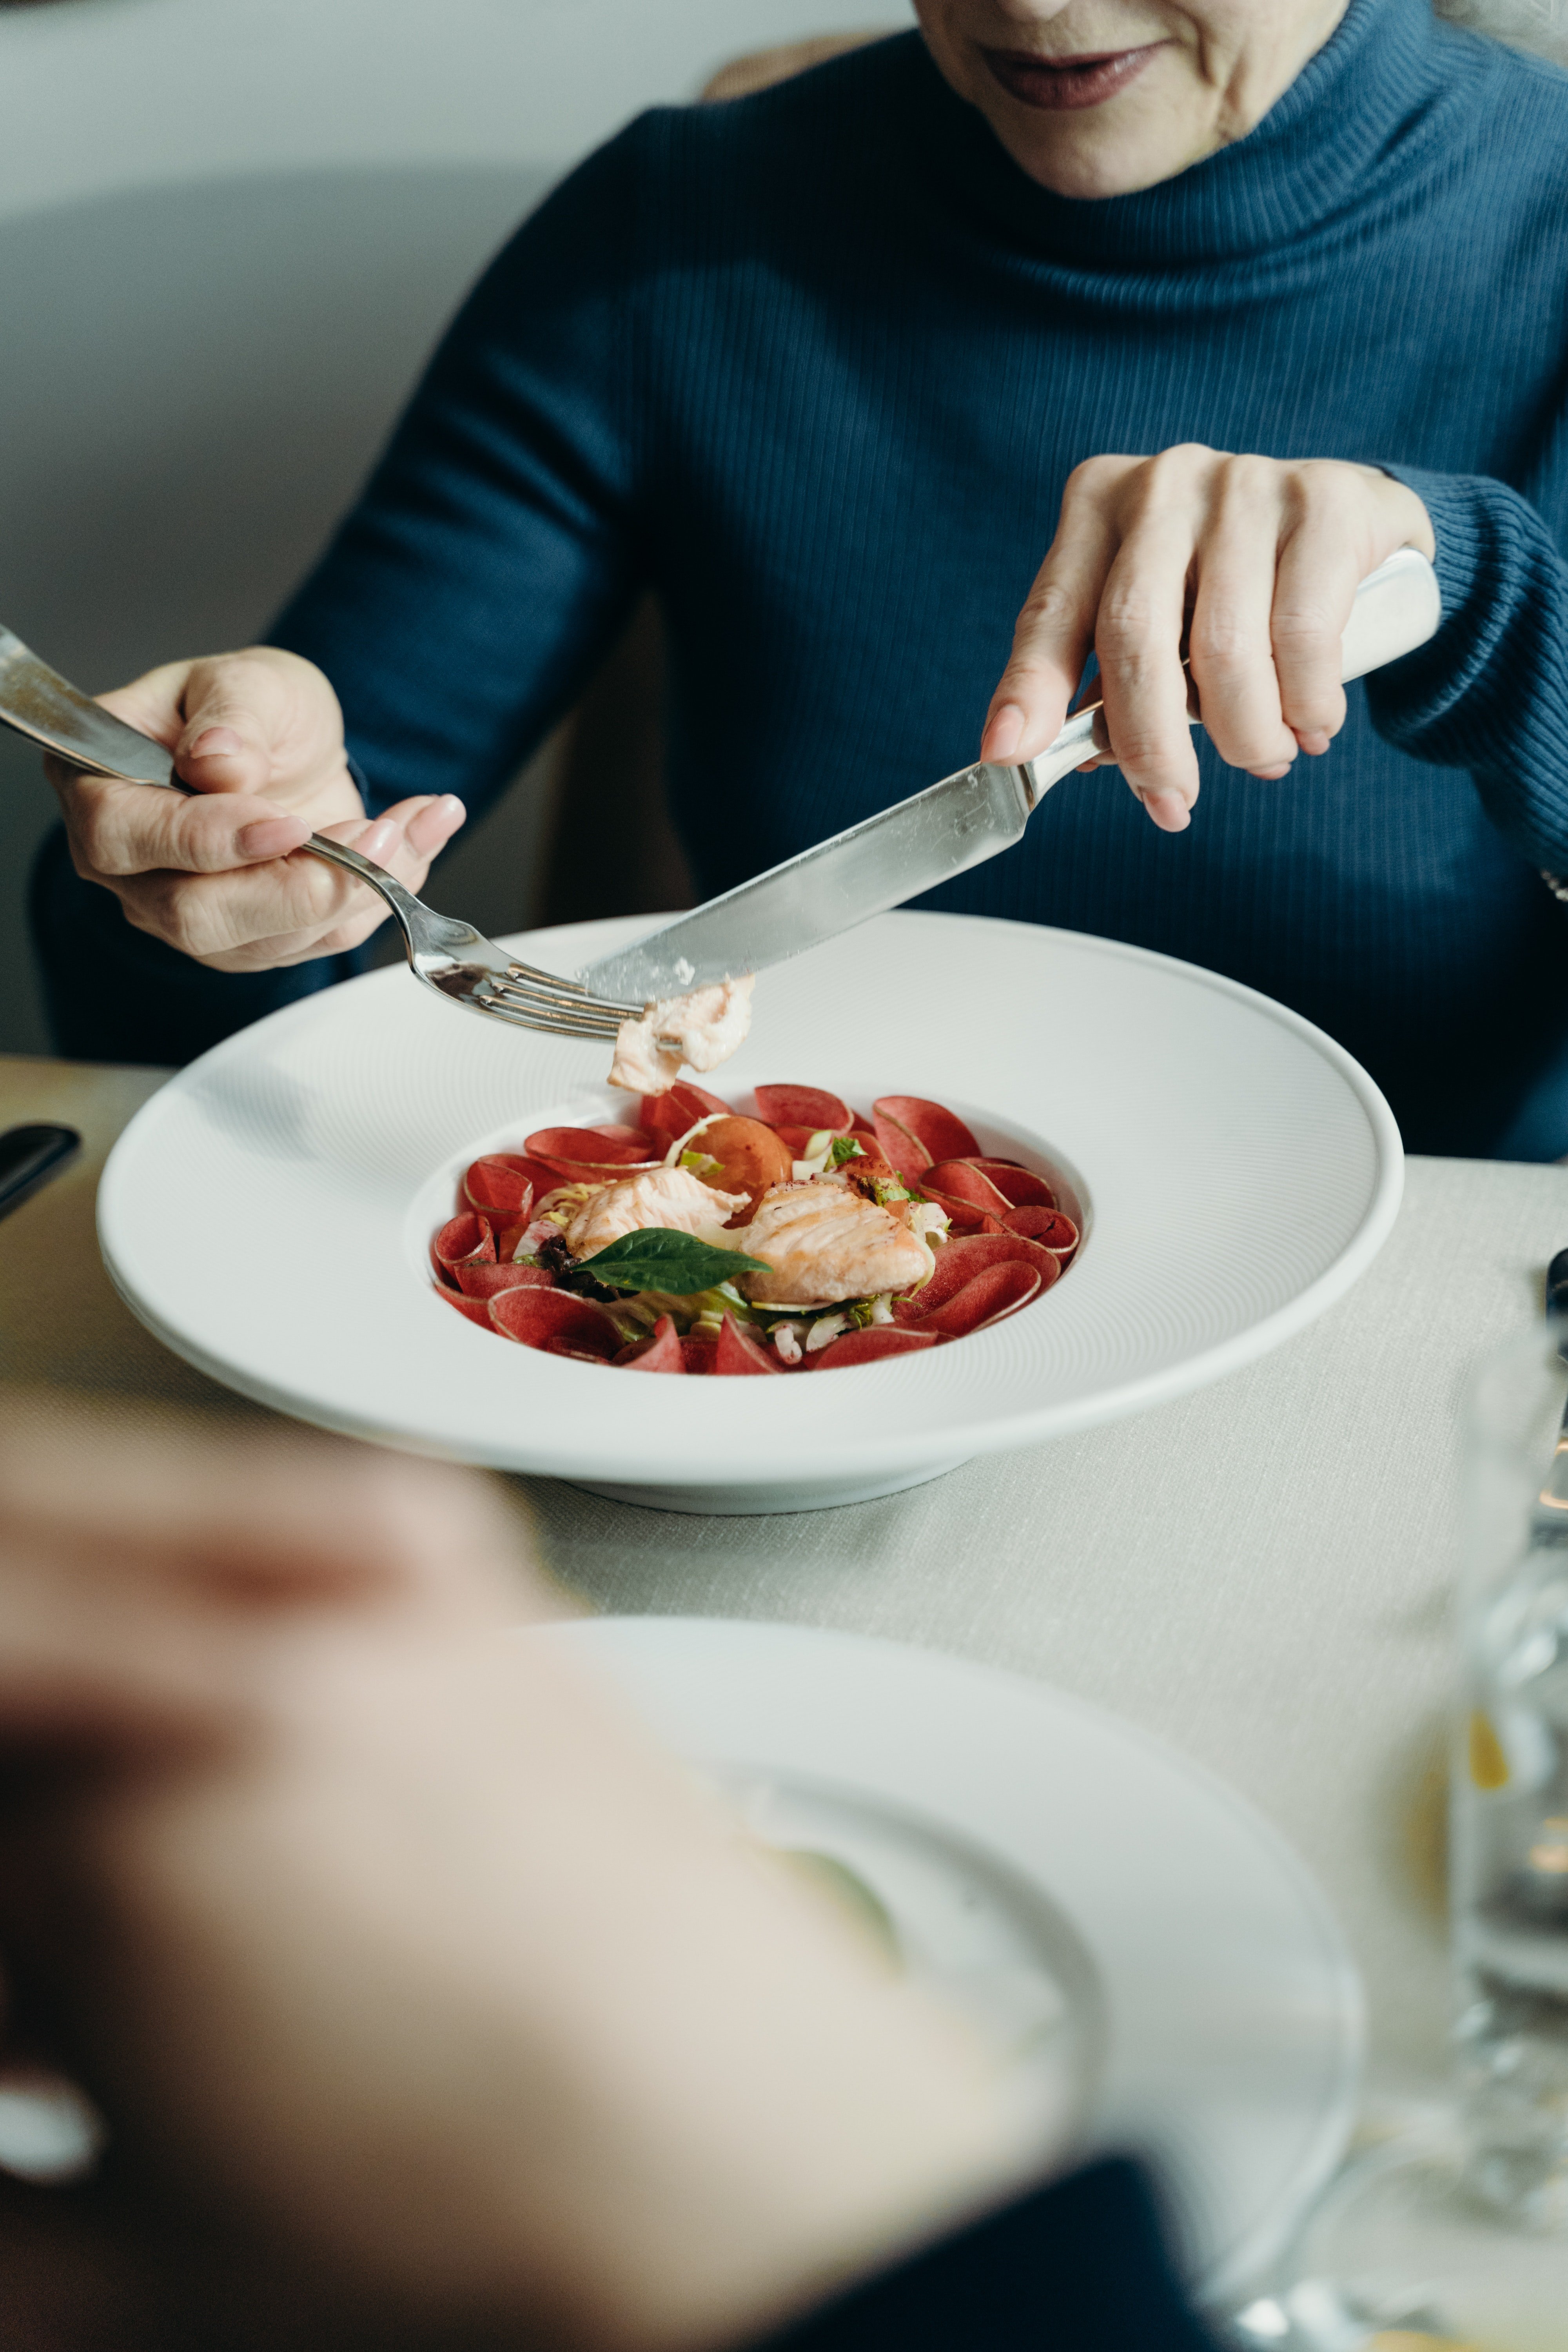 Emily decided to eat out with her mom as she did not like the food at home. | Source: Pexels